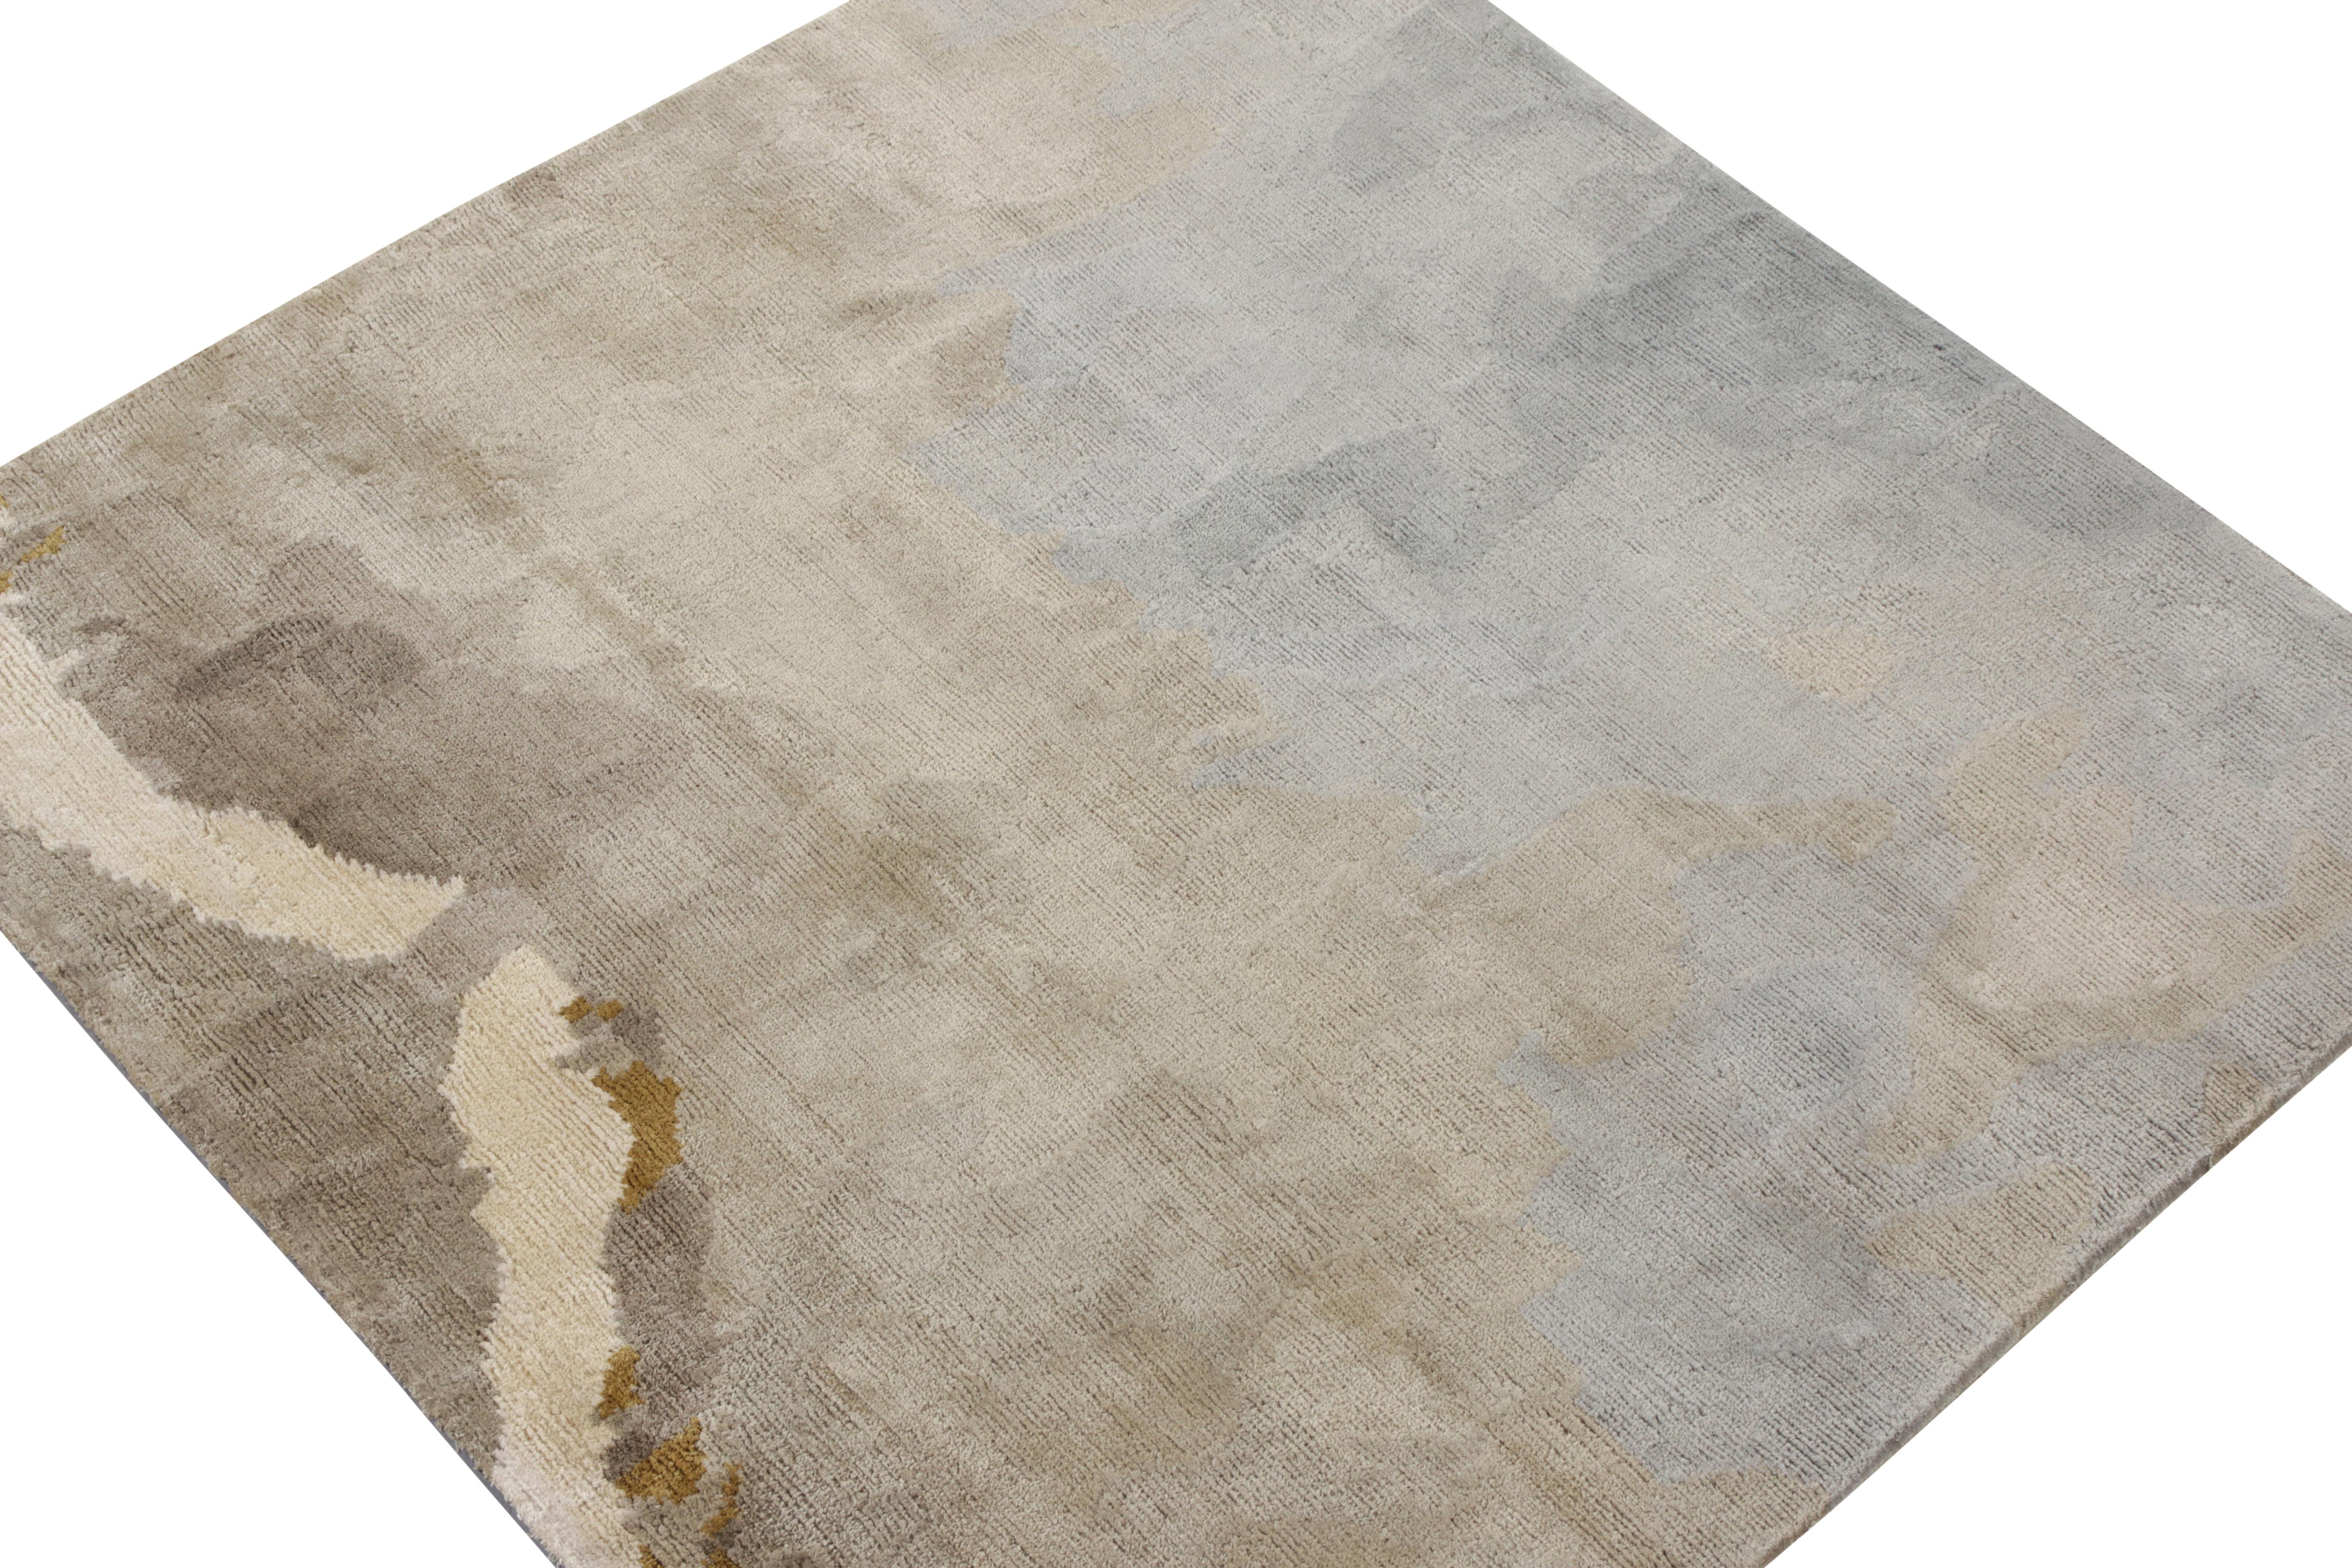 A square abstract accent rug from Rug & Kilim’s New & Modern Collection. The rug prevails in sophisticated tones of blue, silver-gray and off white juxtaposed by golden hints in the beige-brown background. The color tones ascend tastefully across